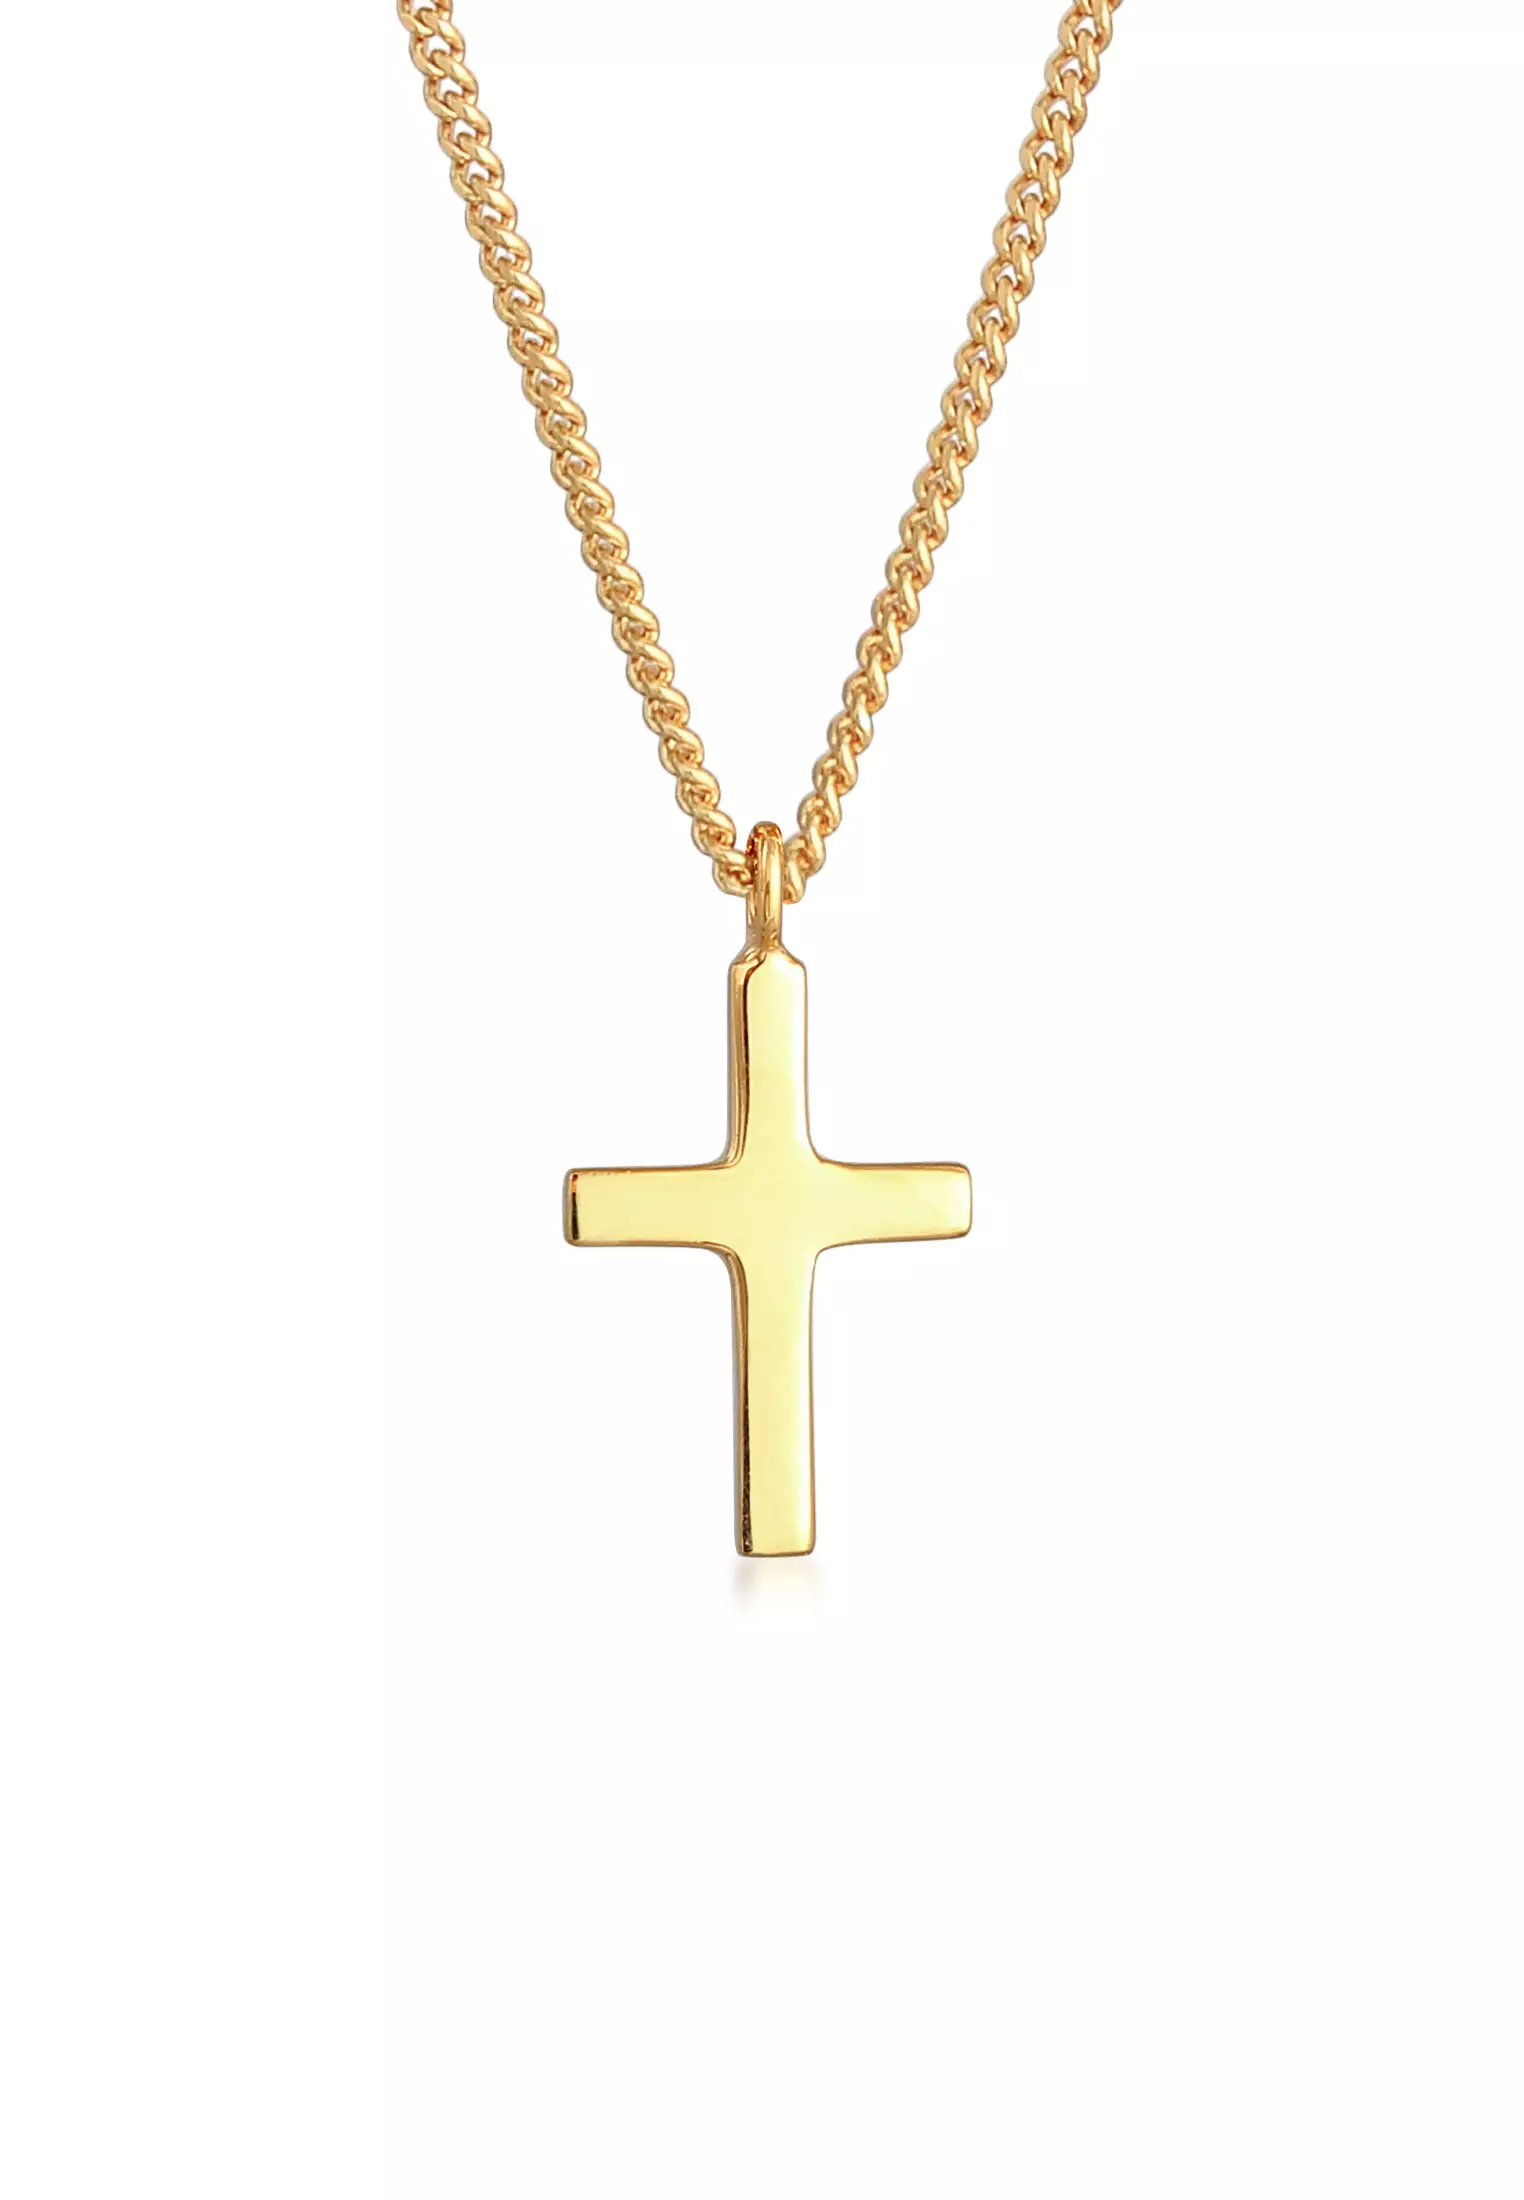 Vermeil / 14K Gold Filled Cross Necklace (Rope Chain)